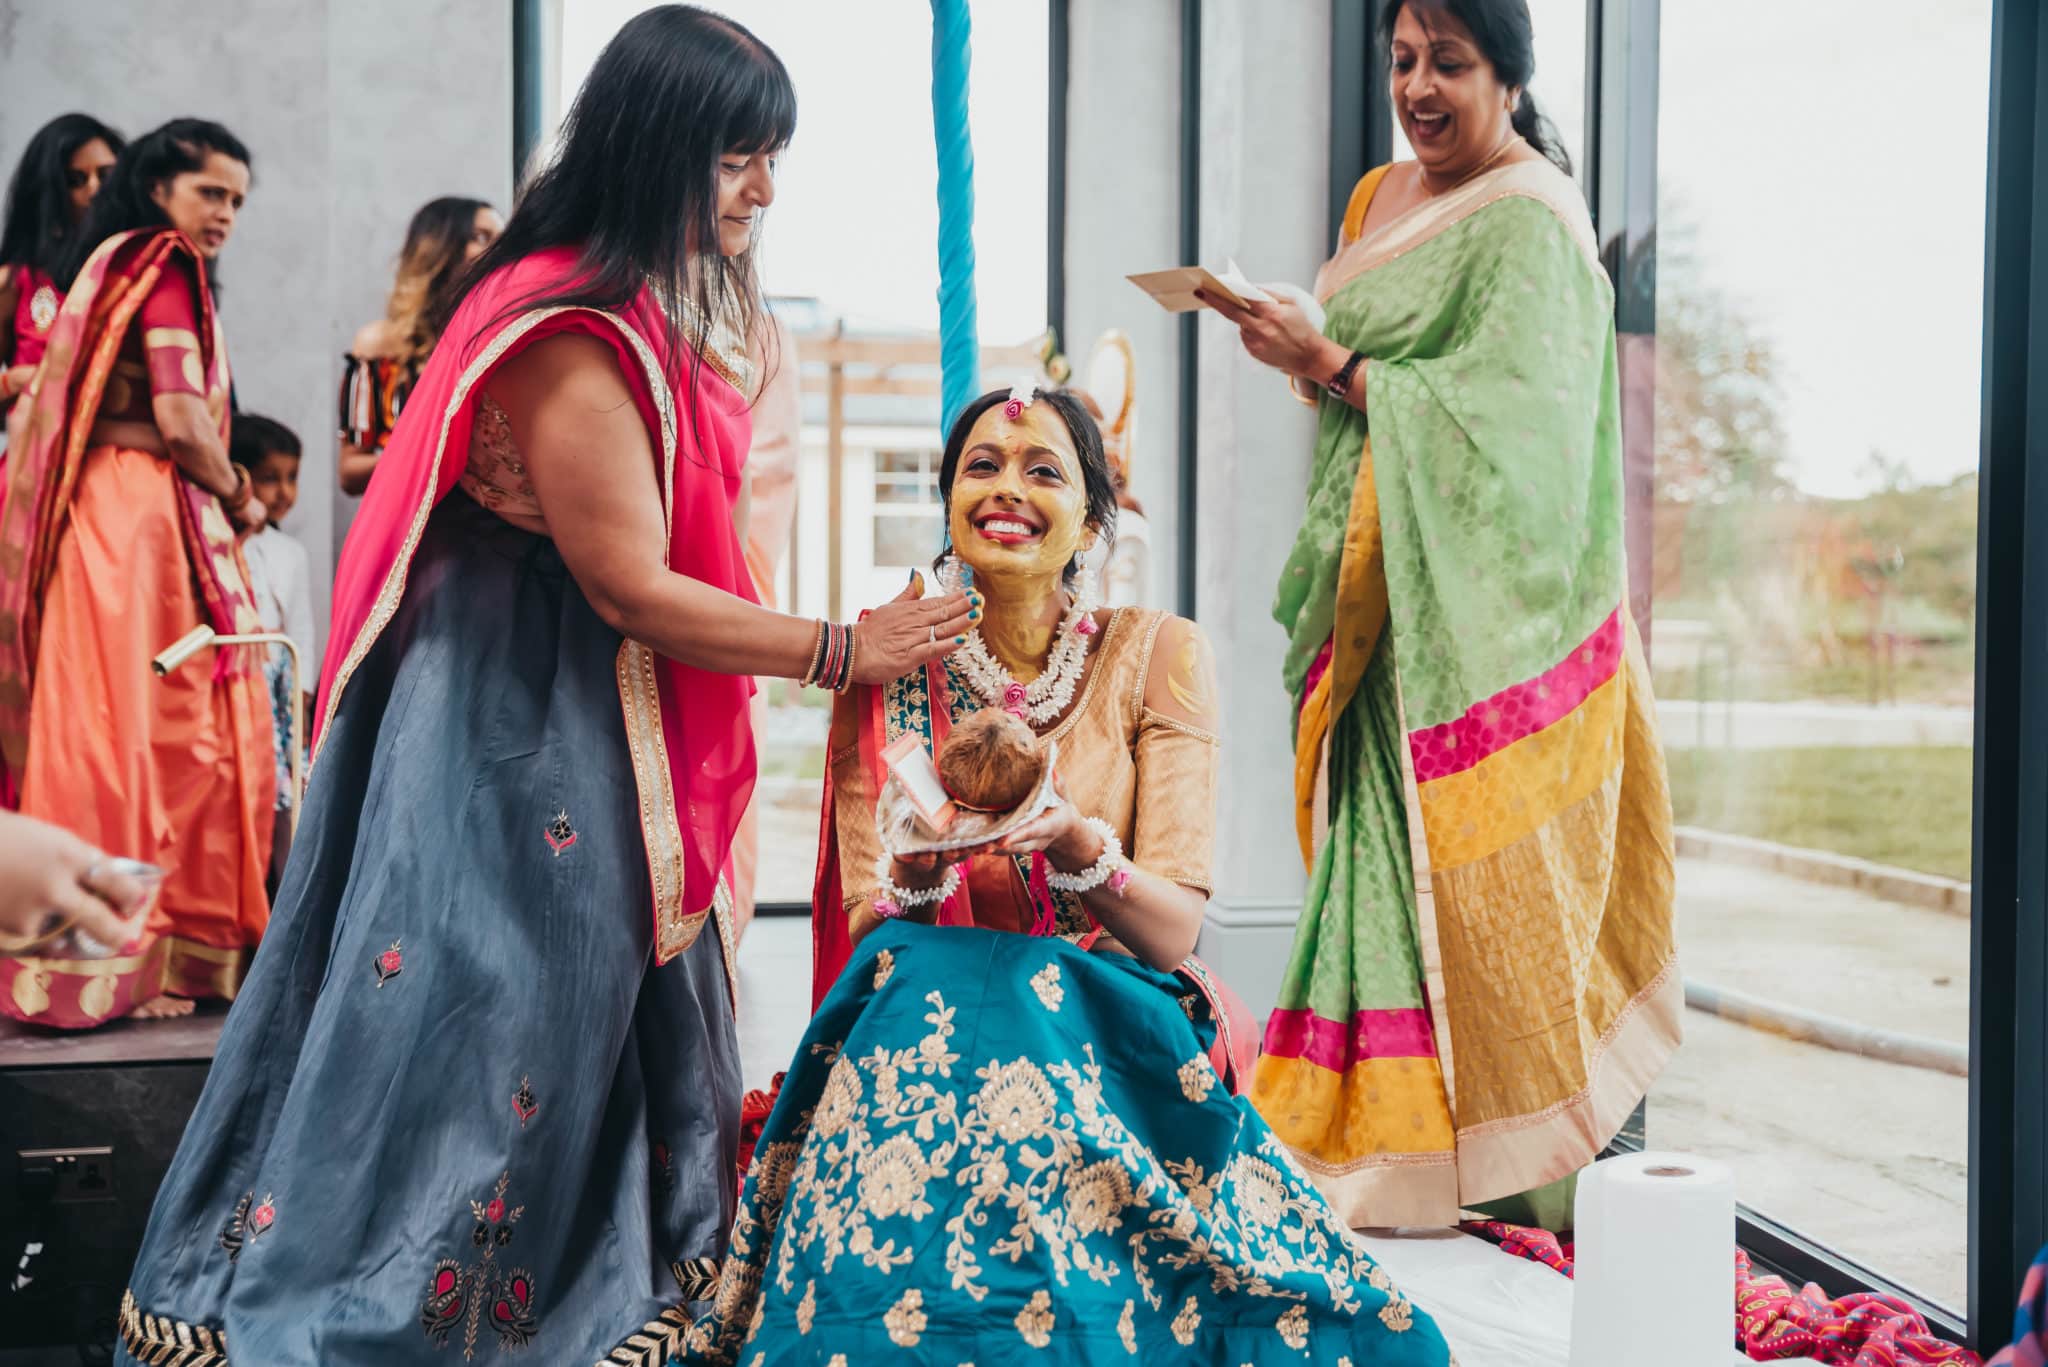 Pithi ceremony in an Indian wedding ceremony, Barnet, Potters Bar London